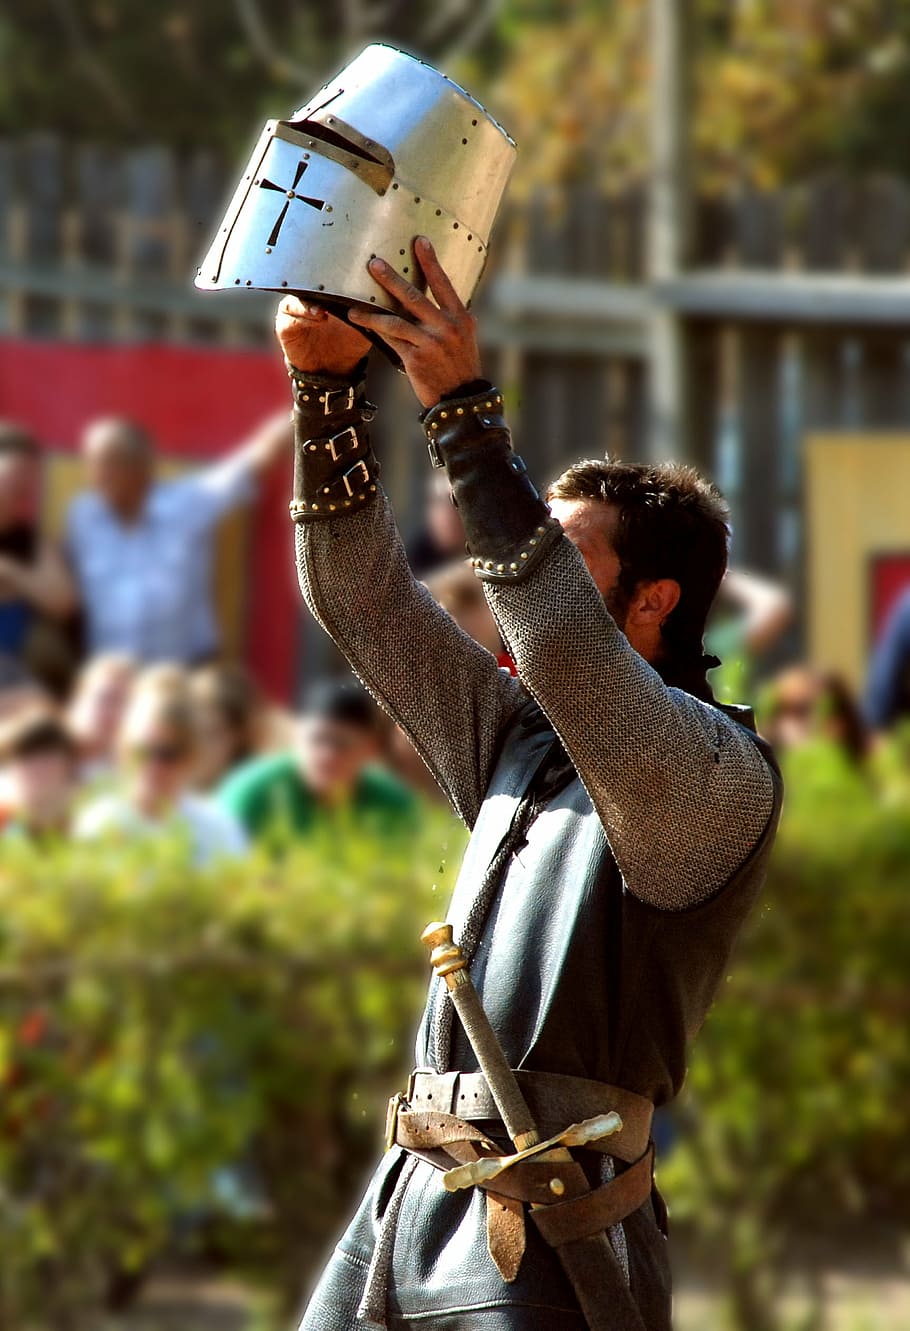 person wearing medieval soldier costume, knight, helmet, armor